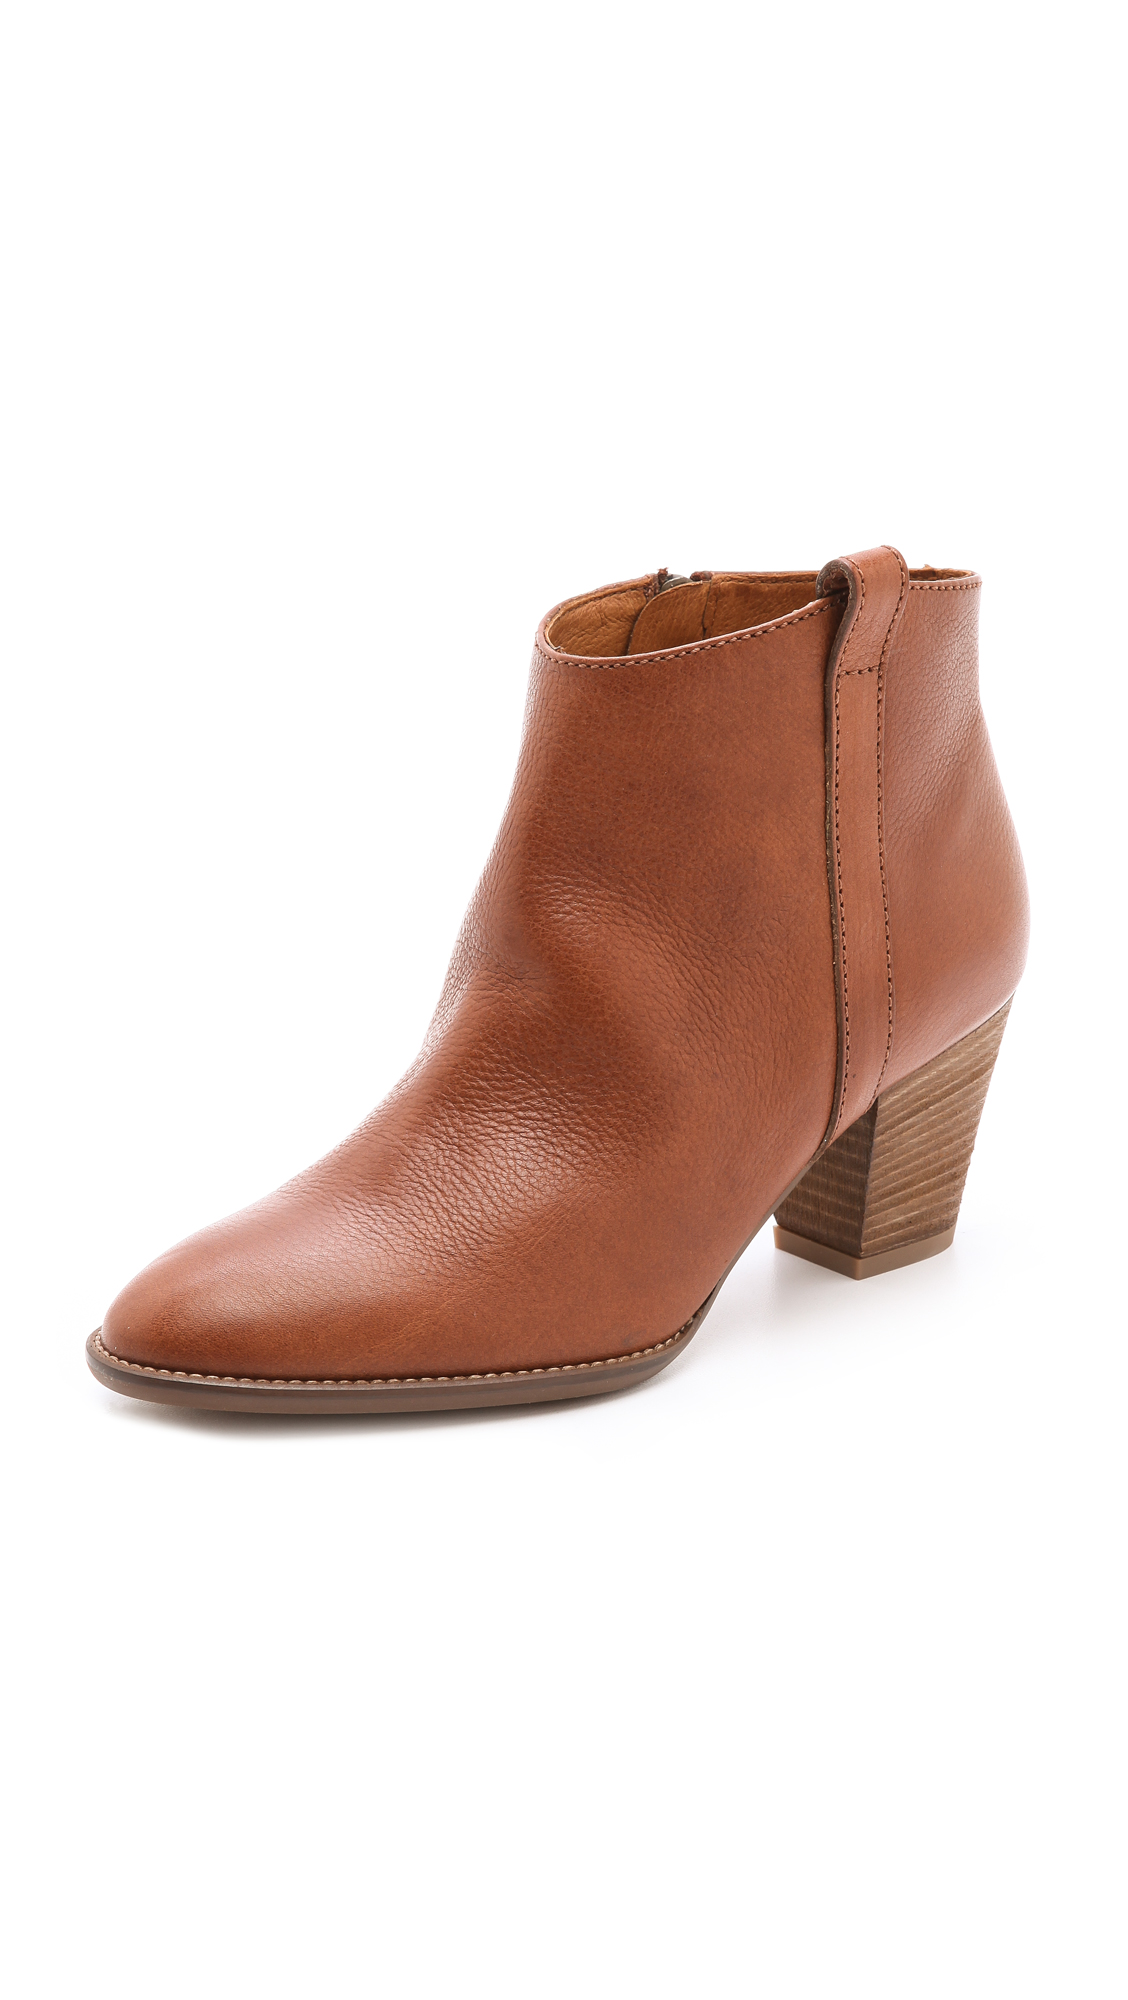 Madewell Billie Boots in Brown - Lyst